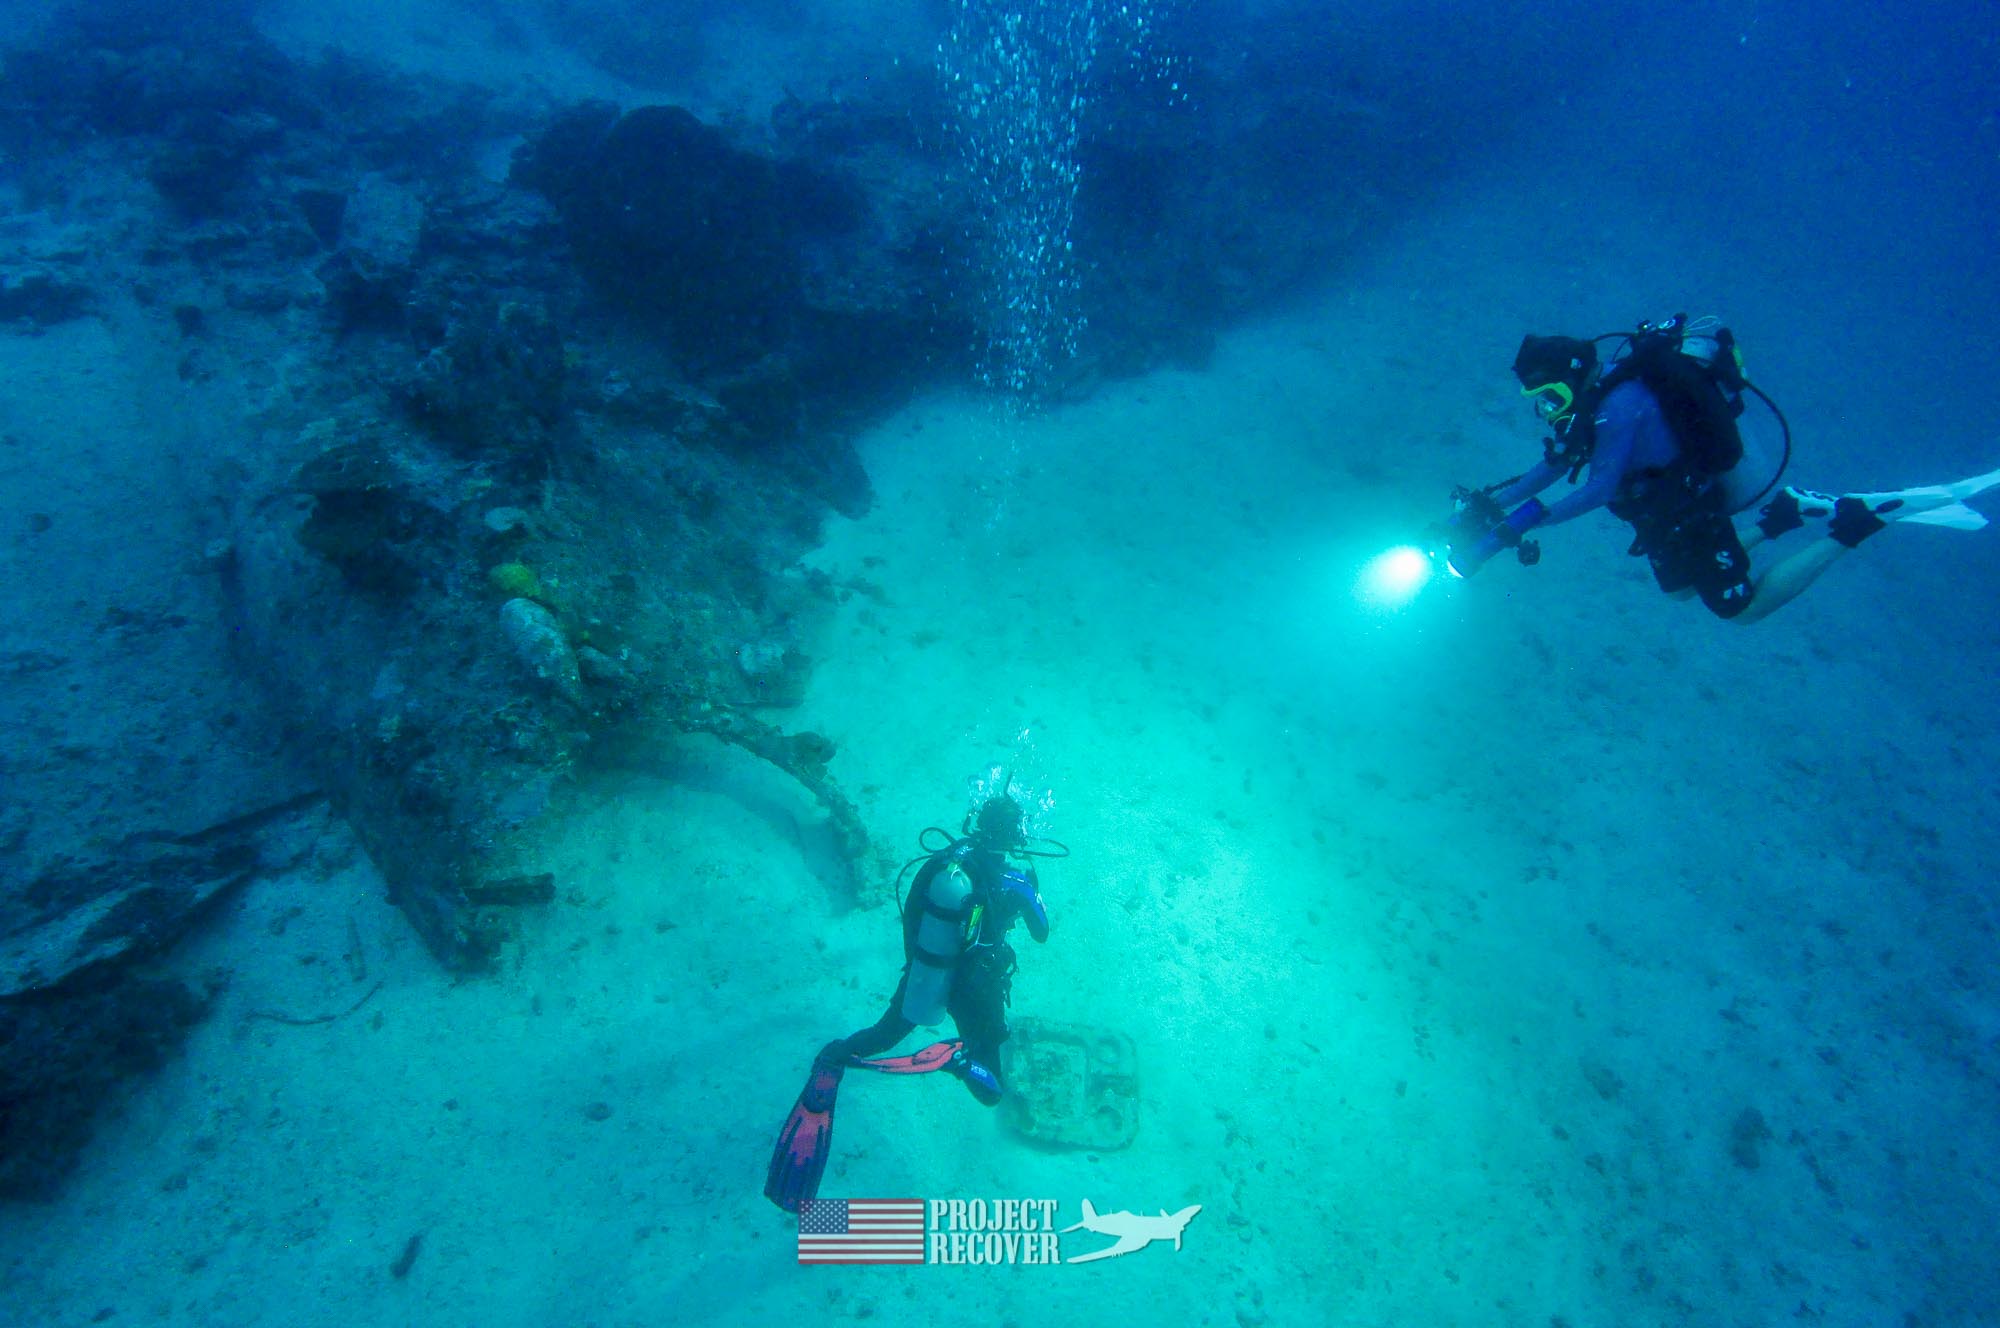 Harry Parker films teammate Megan Lickliter-Mundon while Scuba diving MIA crash sites - Project Recover and BentProp Project are committed to bringing the MIA home. Photos by Harry Parker Photography.com